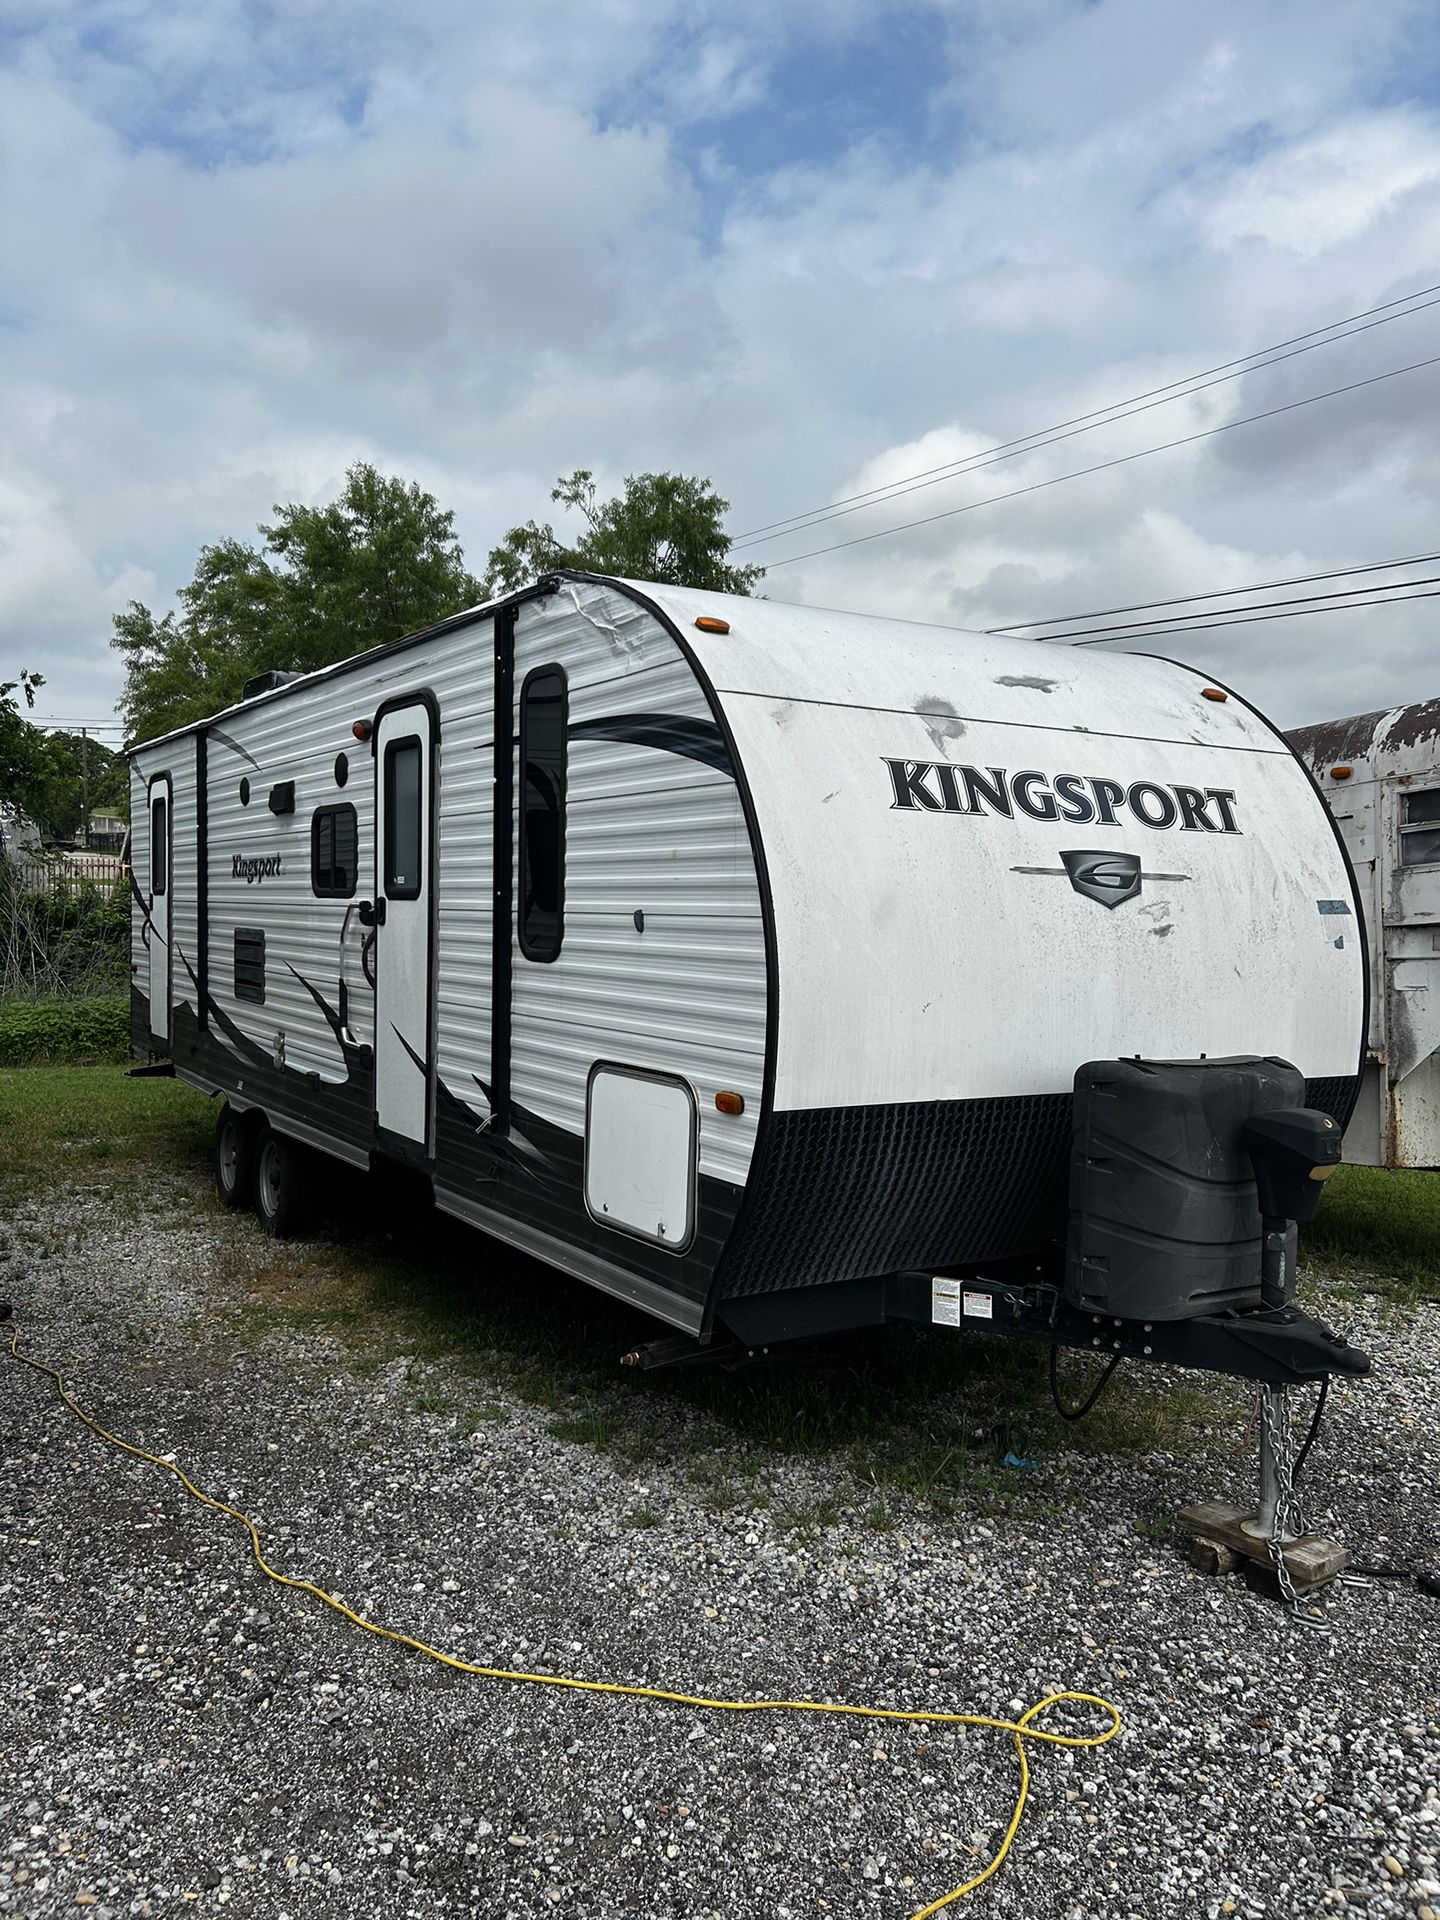 2017 Kingsport, Travel, Trailer, Clean Title. 